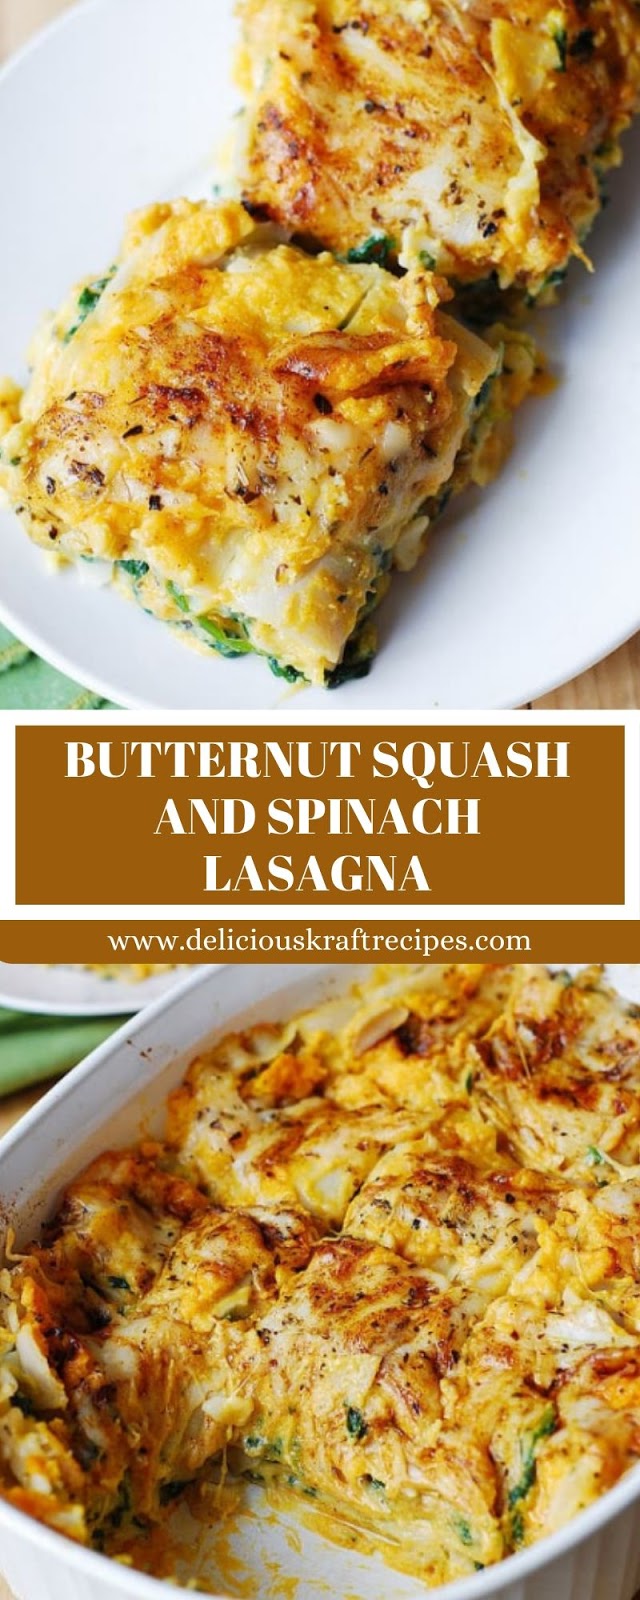 BUTTERNUT SQUASH AND SPINACH LASAGNA